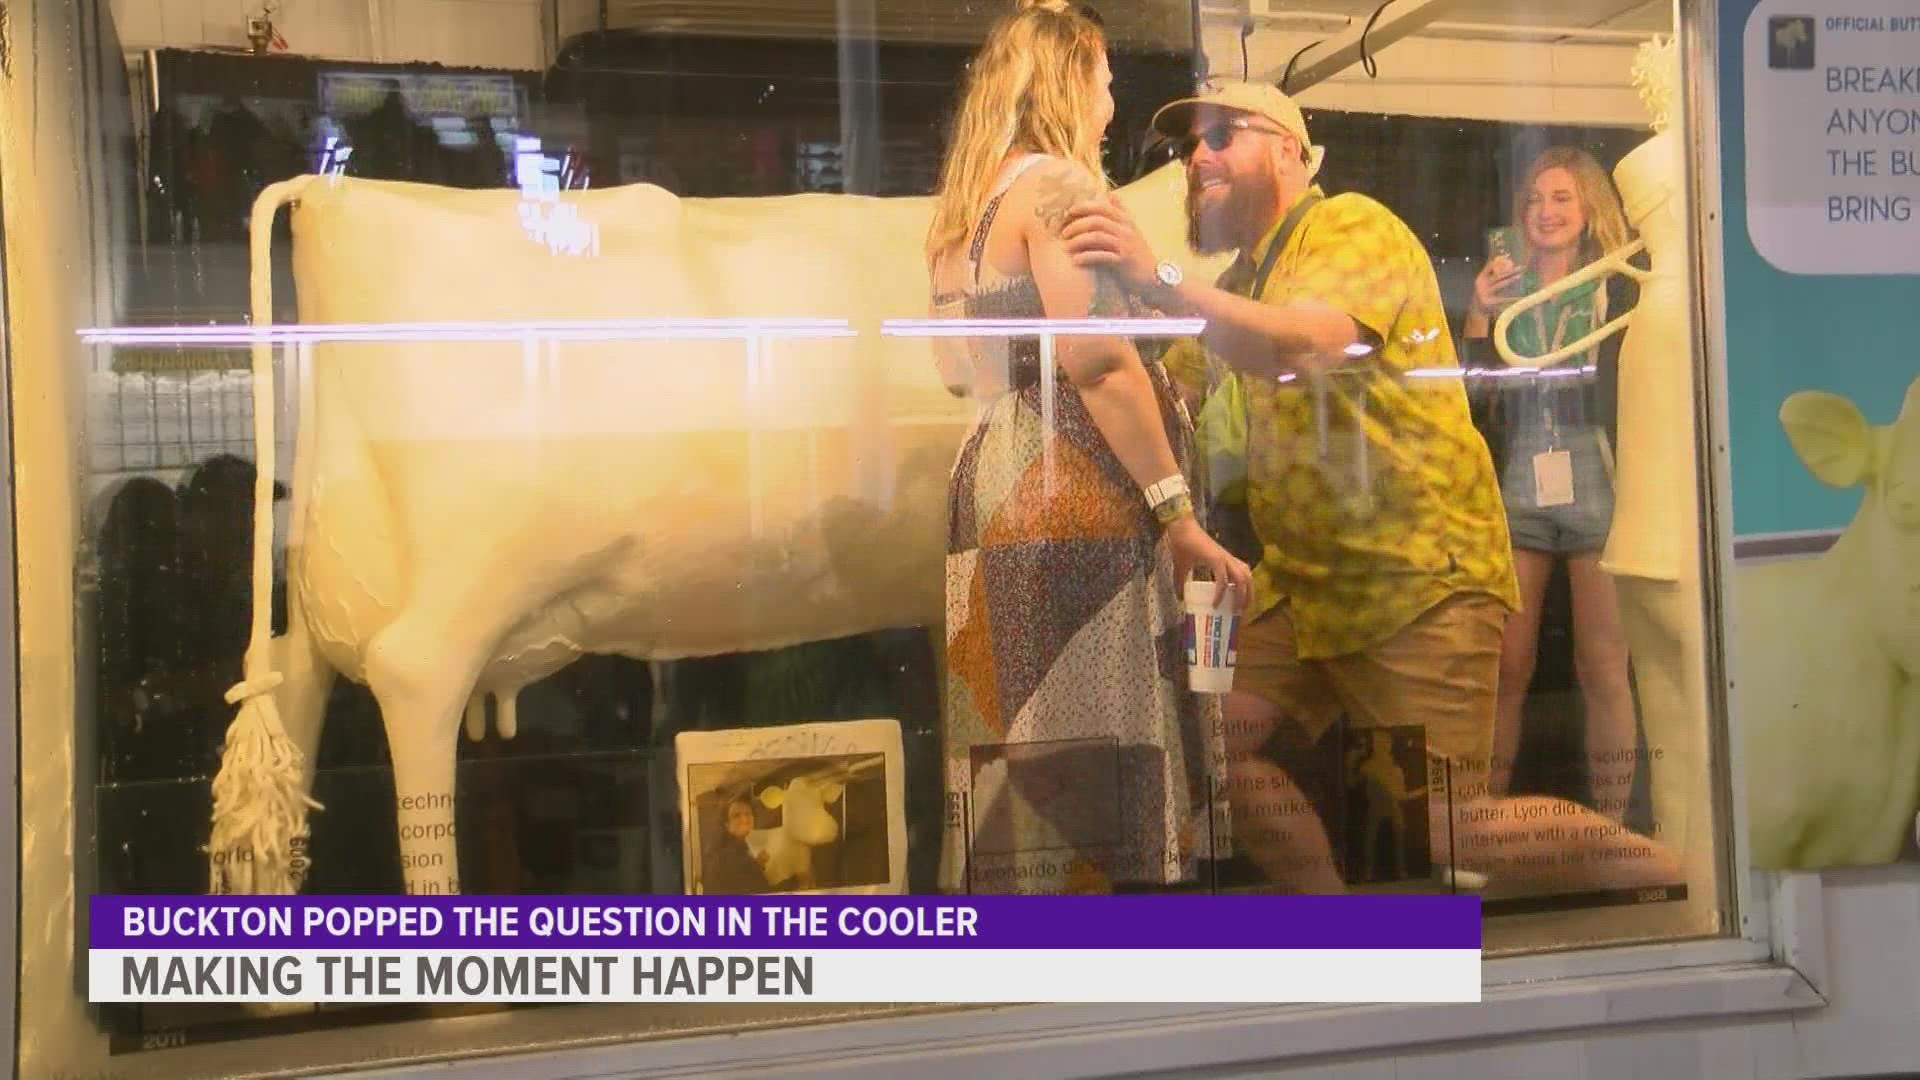 You butter believe it - the Iowa State Fair is your newest engagement destination. Nick Buckton proposed to Mackenzie Burger inside the butter cow cooler.